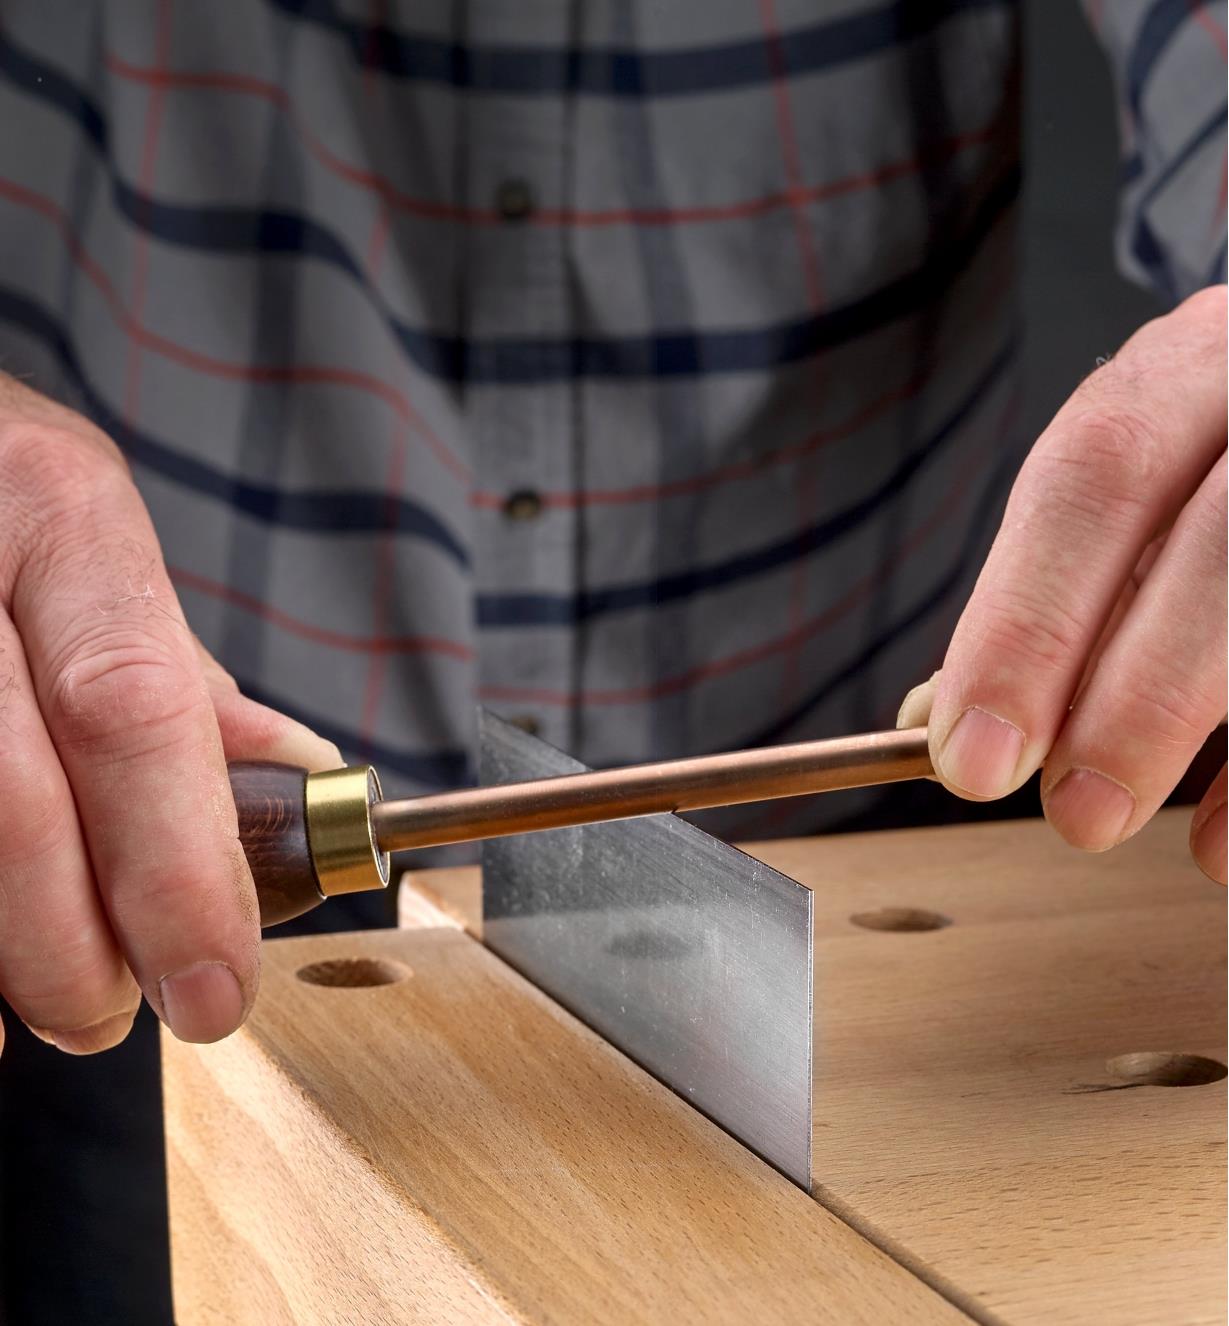 Burnishing a hook on a card scraper using the Veritas Round Burnisher